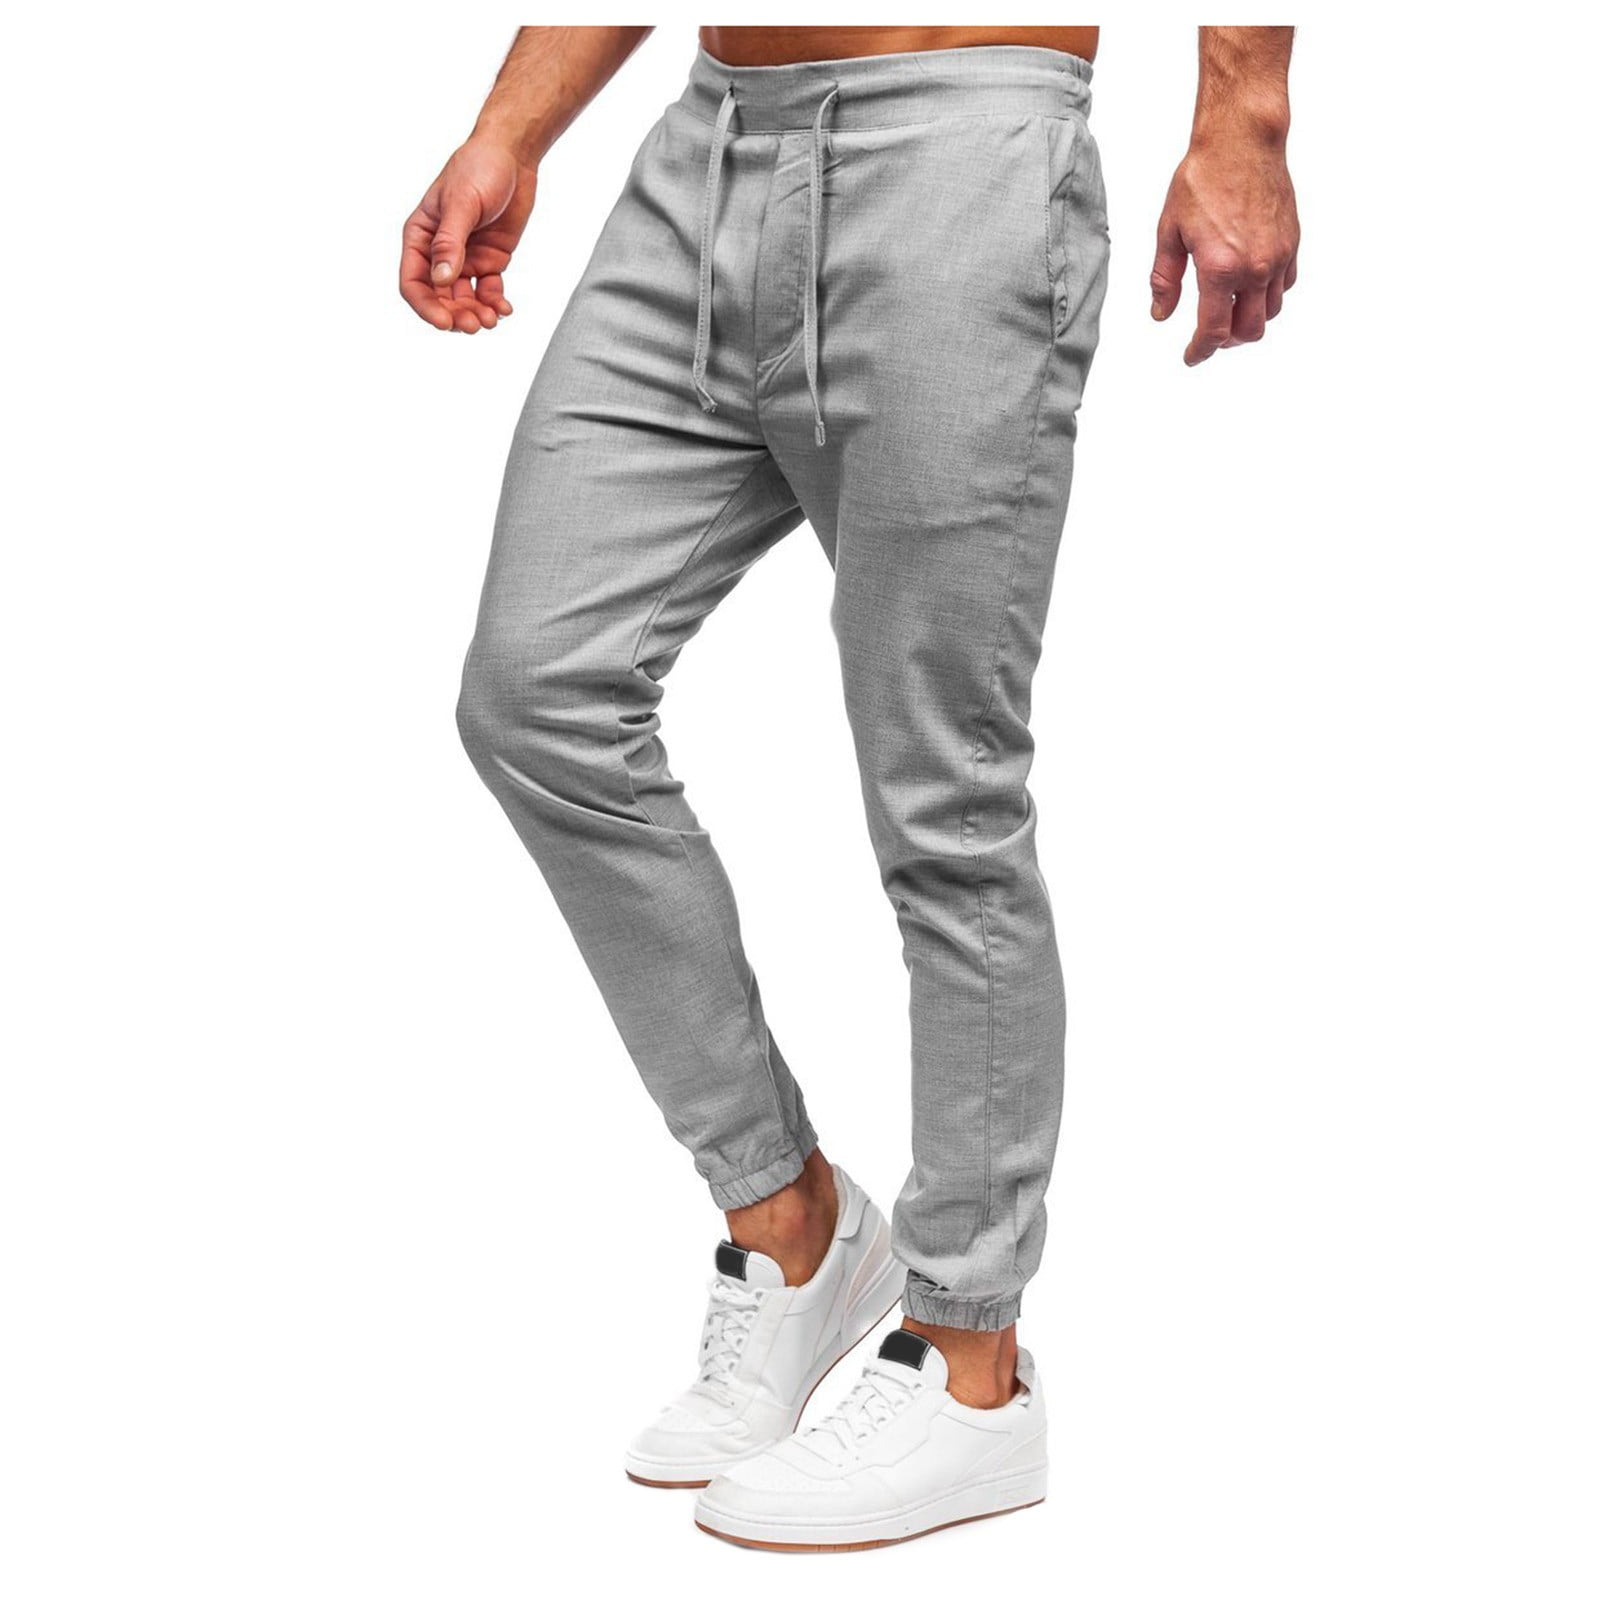 Hsmqhjwe Gymshark Men Cool Weather Pants Loose Jogging Fitness Solid Men's Fashion Trousers Tie-Rope Sports Casual Color Men's Pants Glitter Moccasins